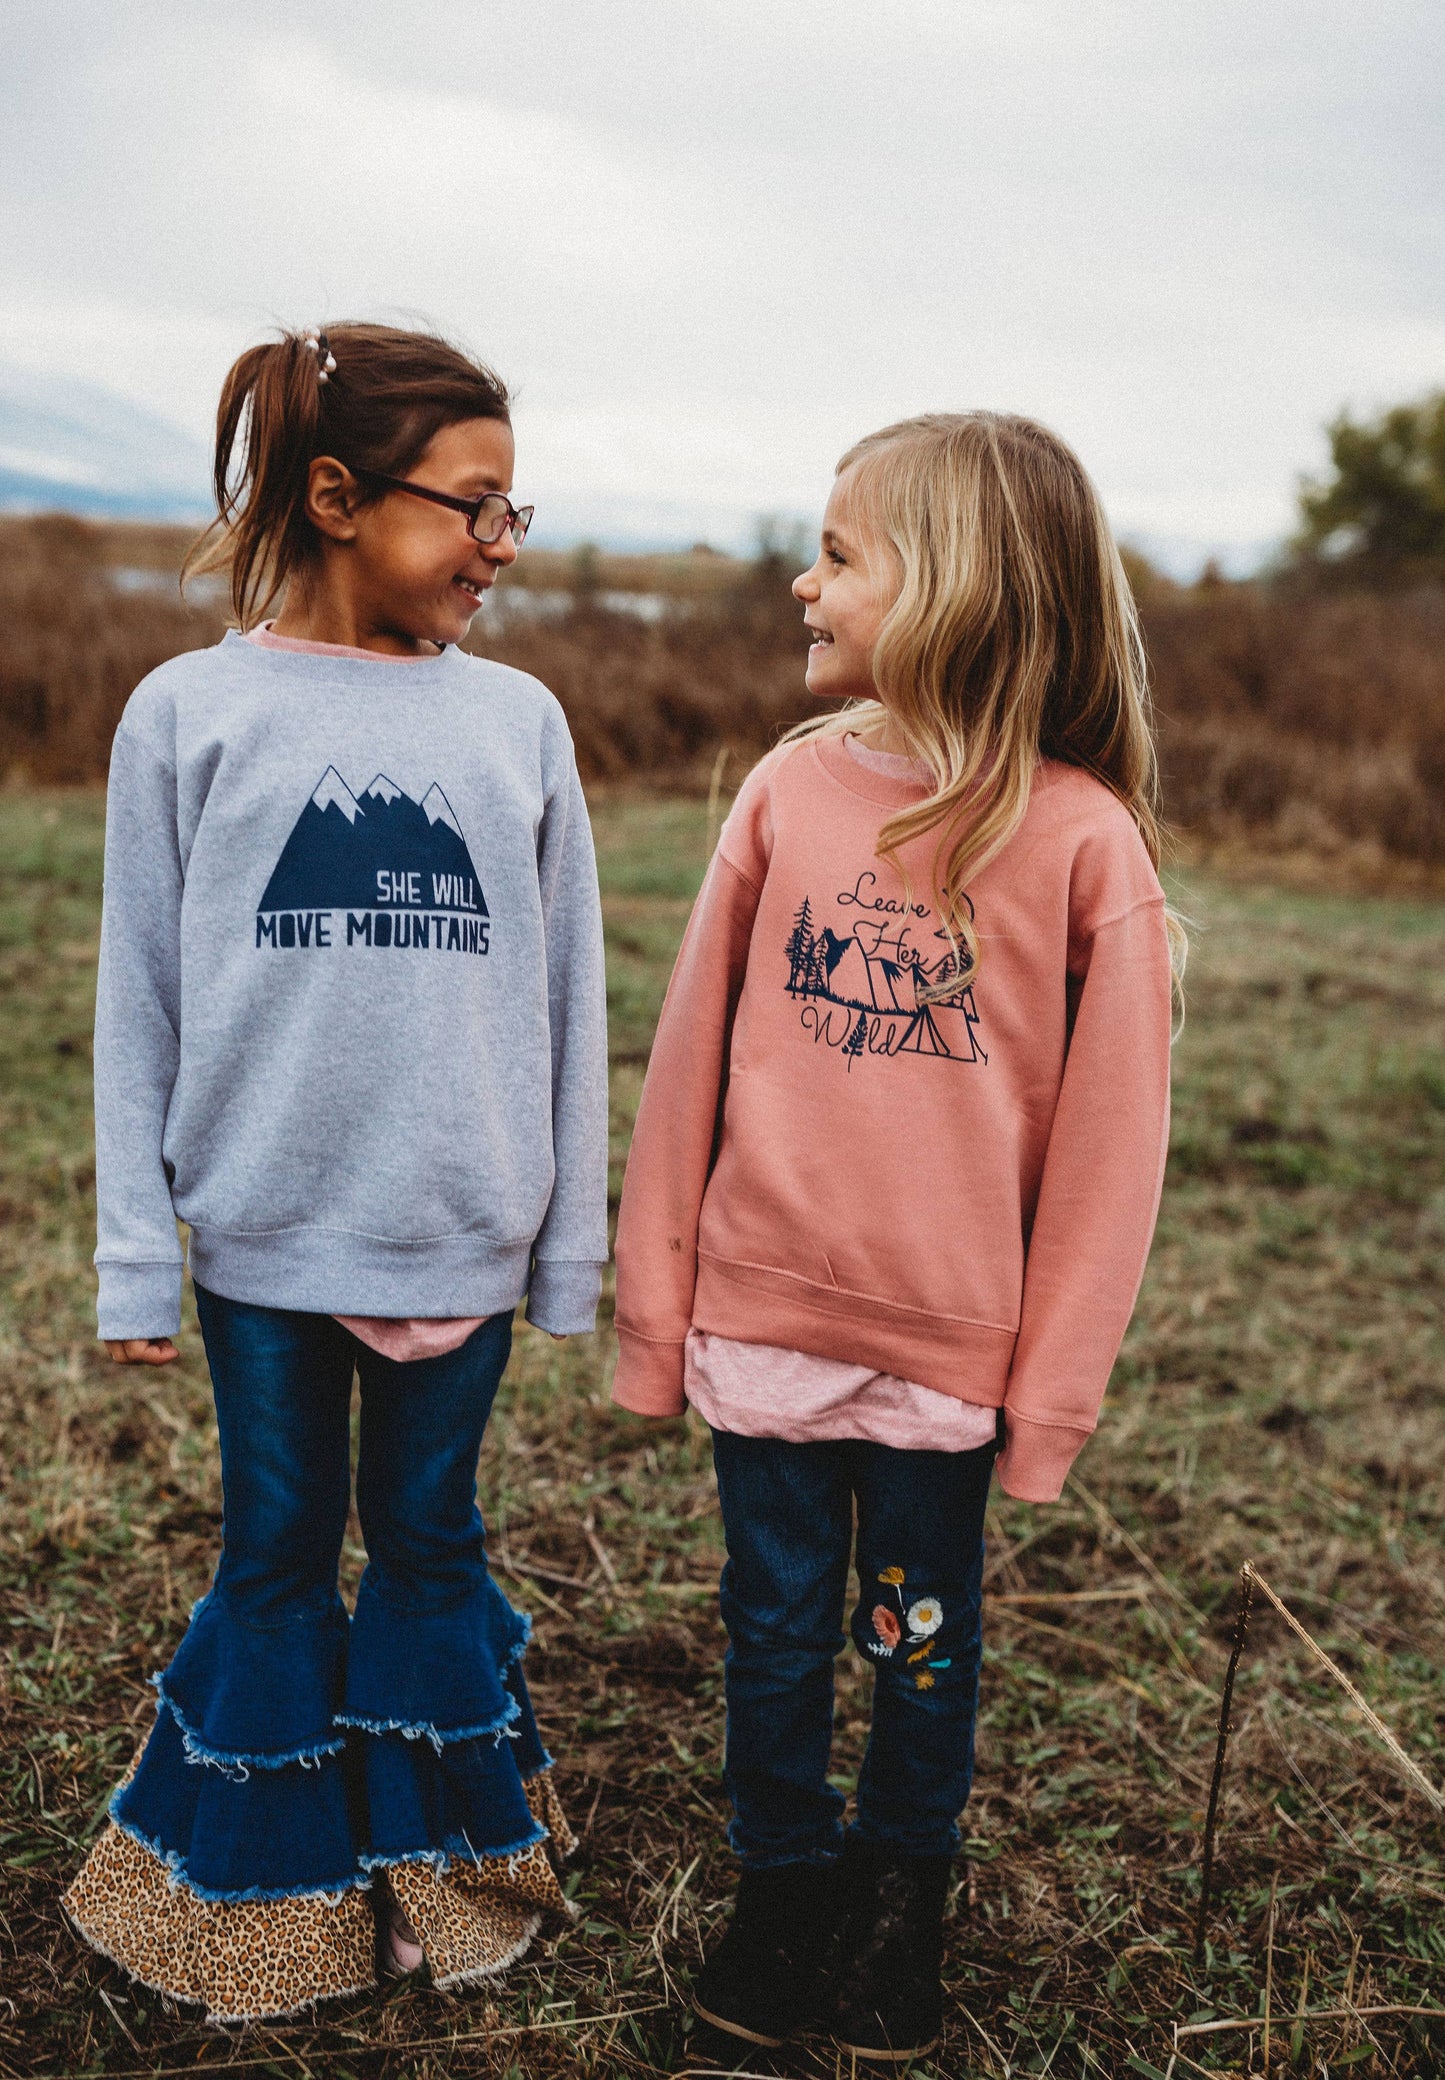 Leave Her Wild Kids Long Sleeve T-Shirt